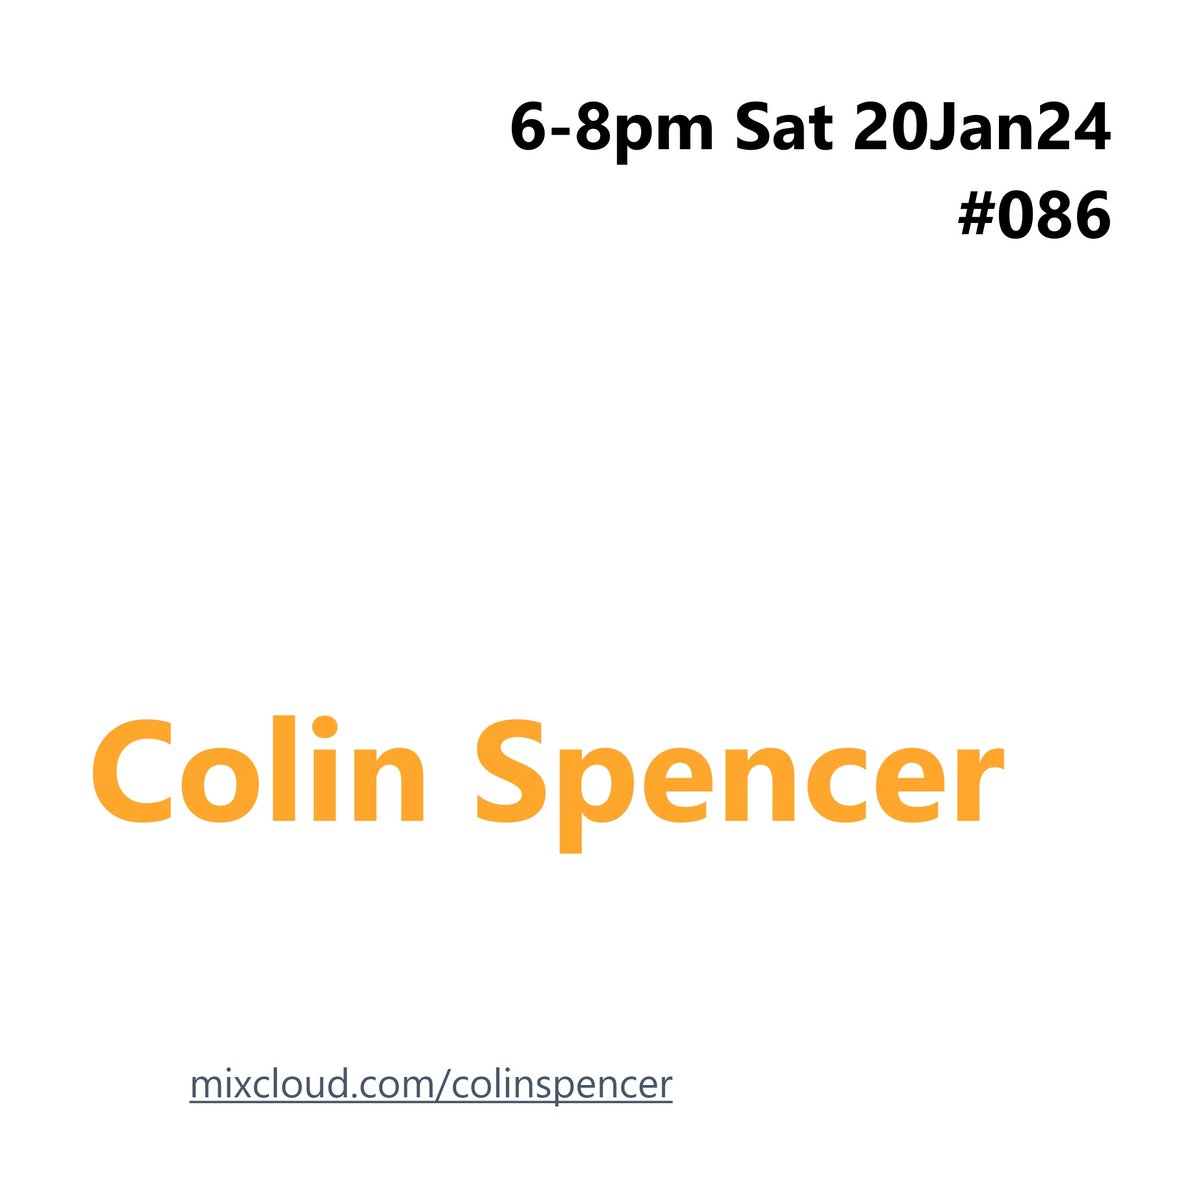 Artists with #NewMusic during #ColinSpencer Programme #086 include #SapphiraVee : #StabbedByProngs Mix 🔊mixcloud.com/colinspencer/🎧 Saturday 20 January 2024 6-8pm (#UK times) #DiscoverAndRemember @Sapphira_Music Before then? Here's catch-up #081 ▶️mixcloud.com/ColinSpencer/c…